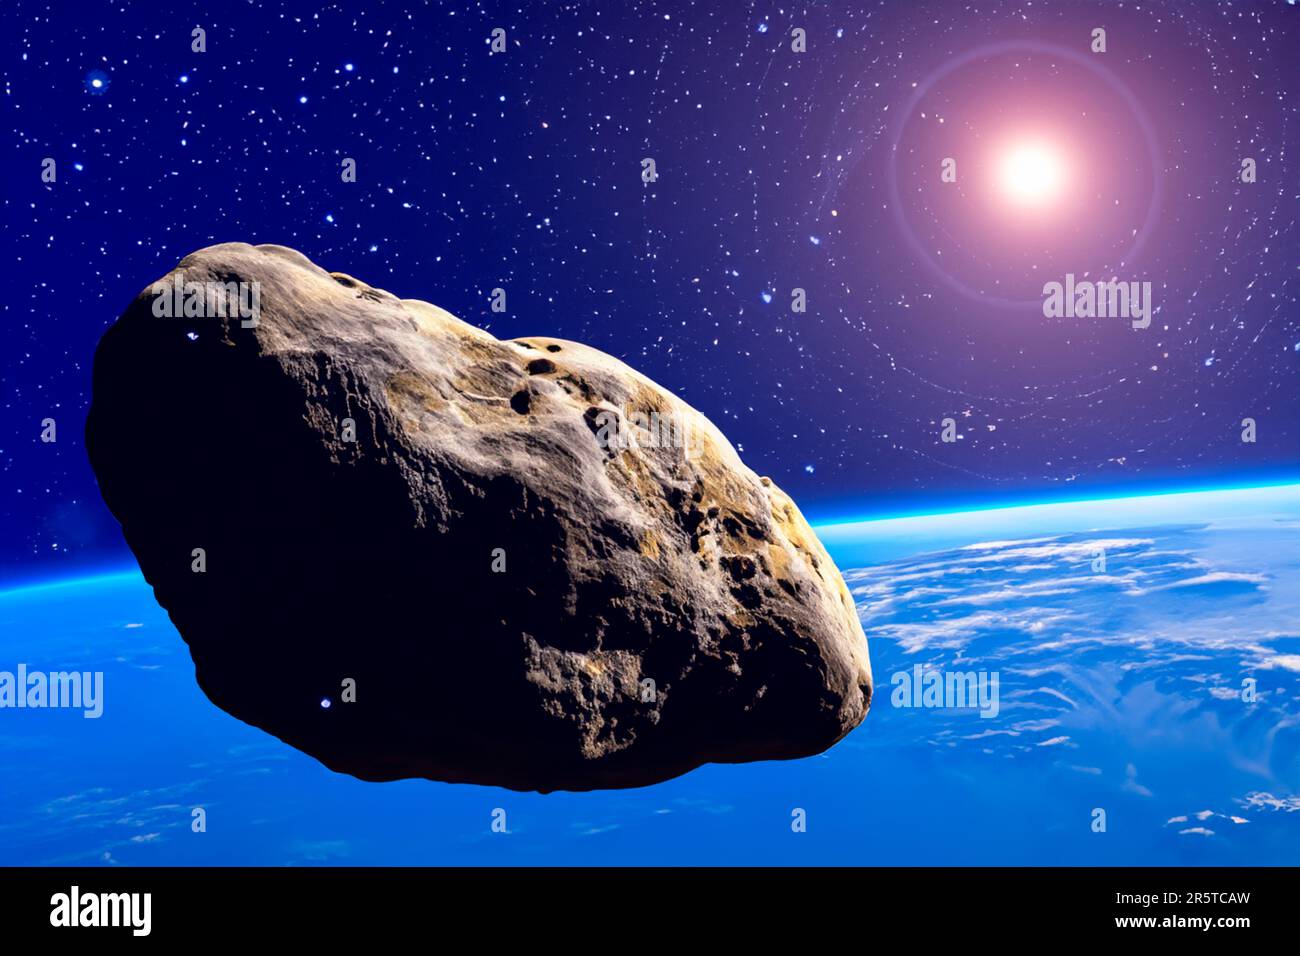 https://c8.alamy.com/comp/2R5TCAW/asteroid-giant-asteroid-cruising-near-planet-earth-scenery-or-spacescape-outer-space-landscape-and-astronomy-3d-rendering-illustration-2R5TCAW.jpg